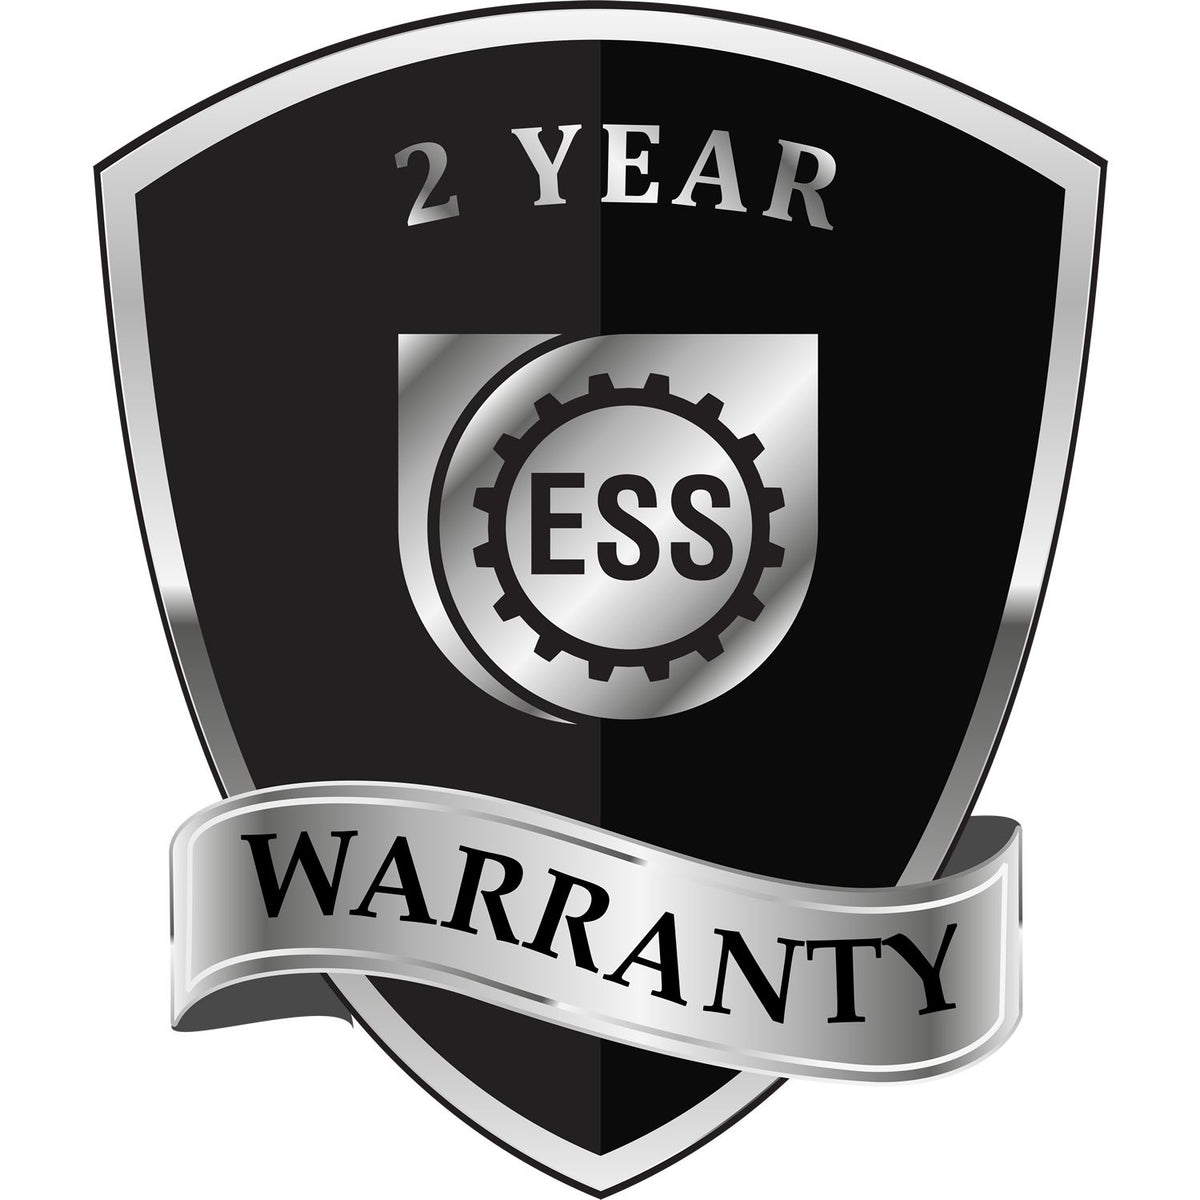 A black and silver badge or emblem showing warranty information for the Heavy Duty Cast Iron Massachusetts Geologist Seal Embosser